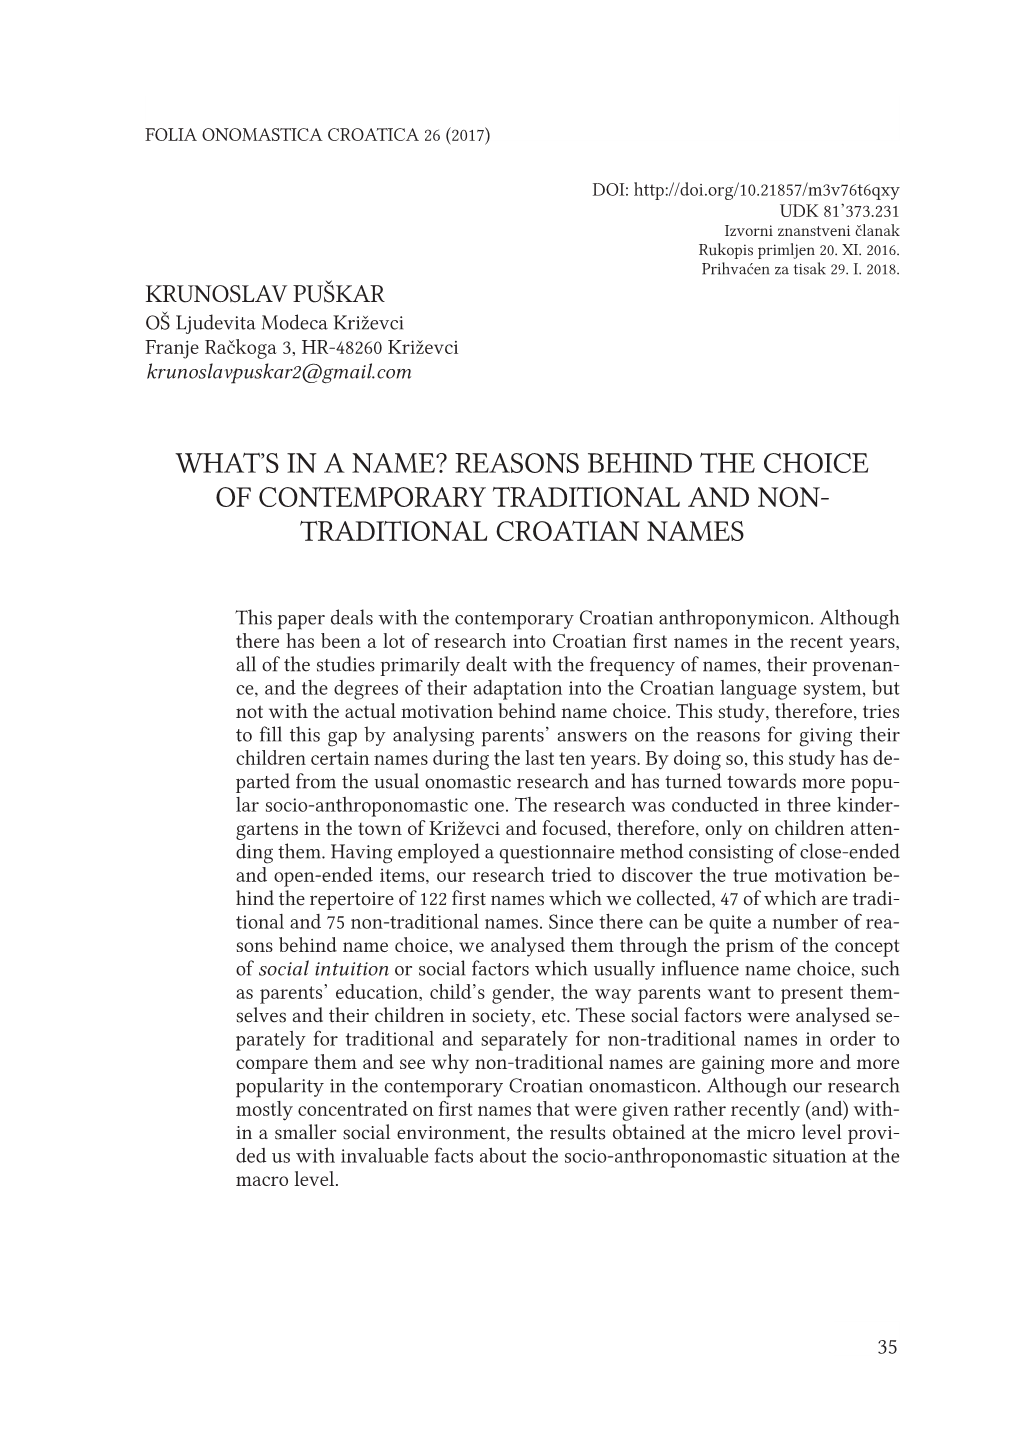 Whatʼs in a Name? Reasons Behind the Choice of Contemporary Traditional and Non- Traditional Croatian Names